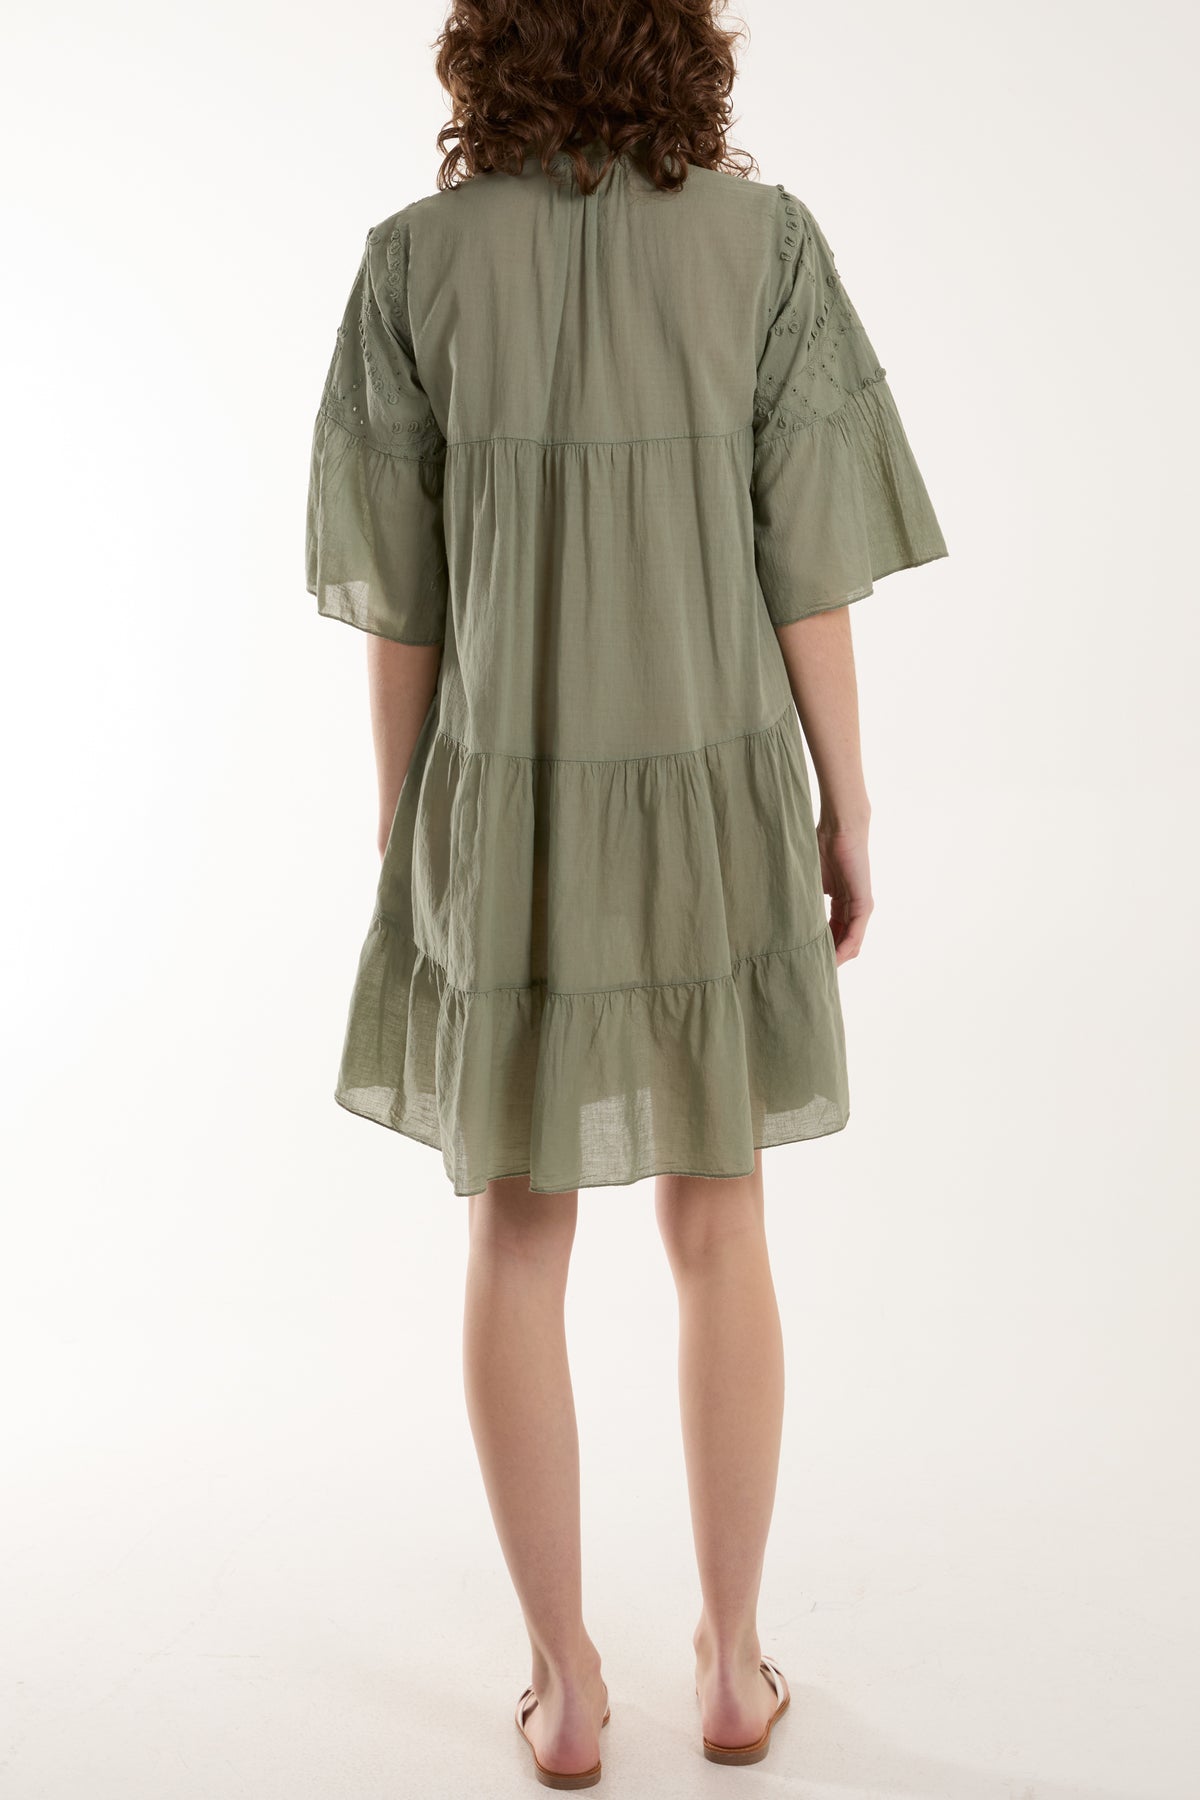 Broderie Anglaise 3D Leaves Smock Dress